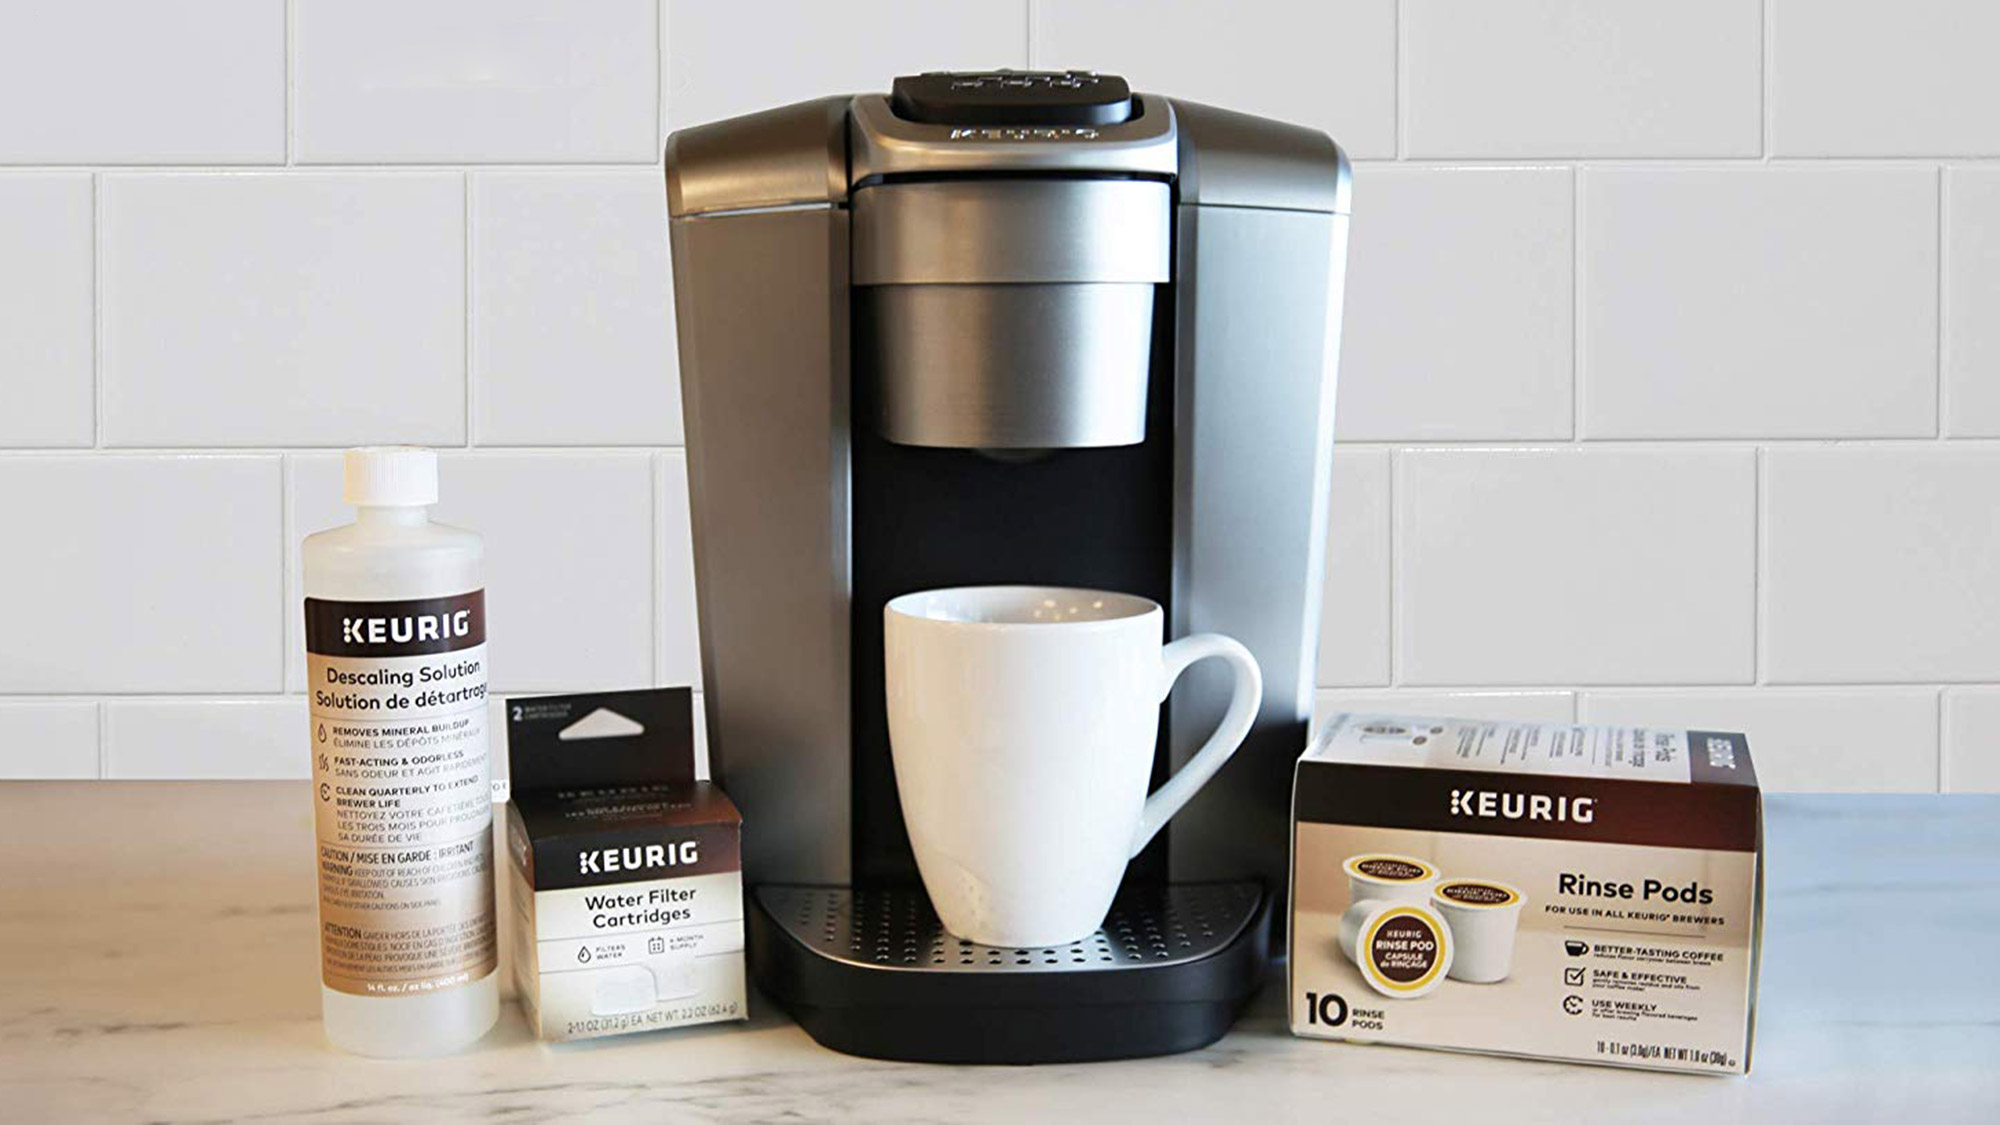 How To Descale A Keurig Coffee Maker: An Expert Guide